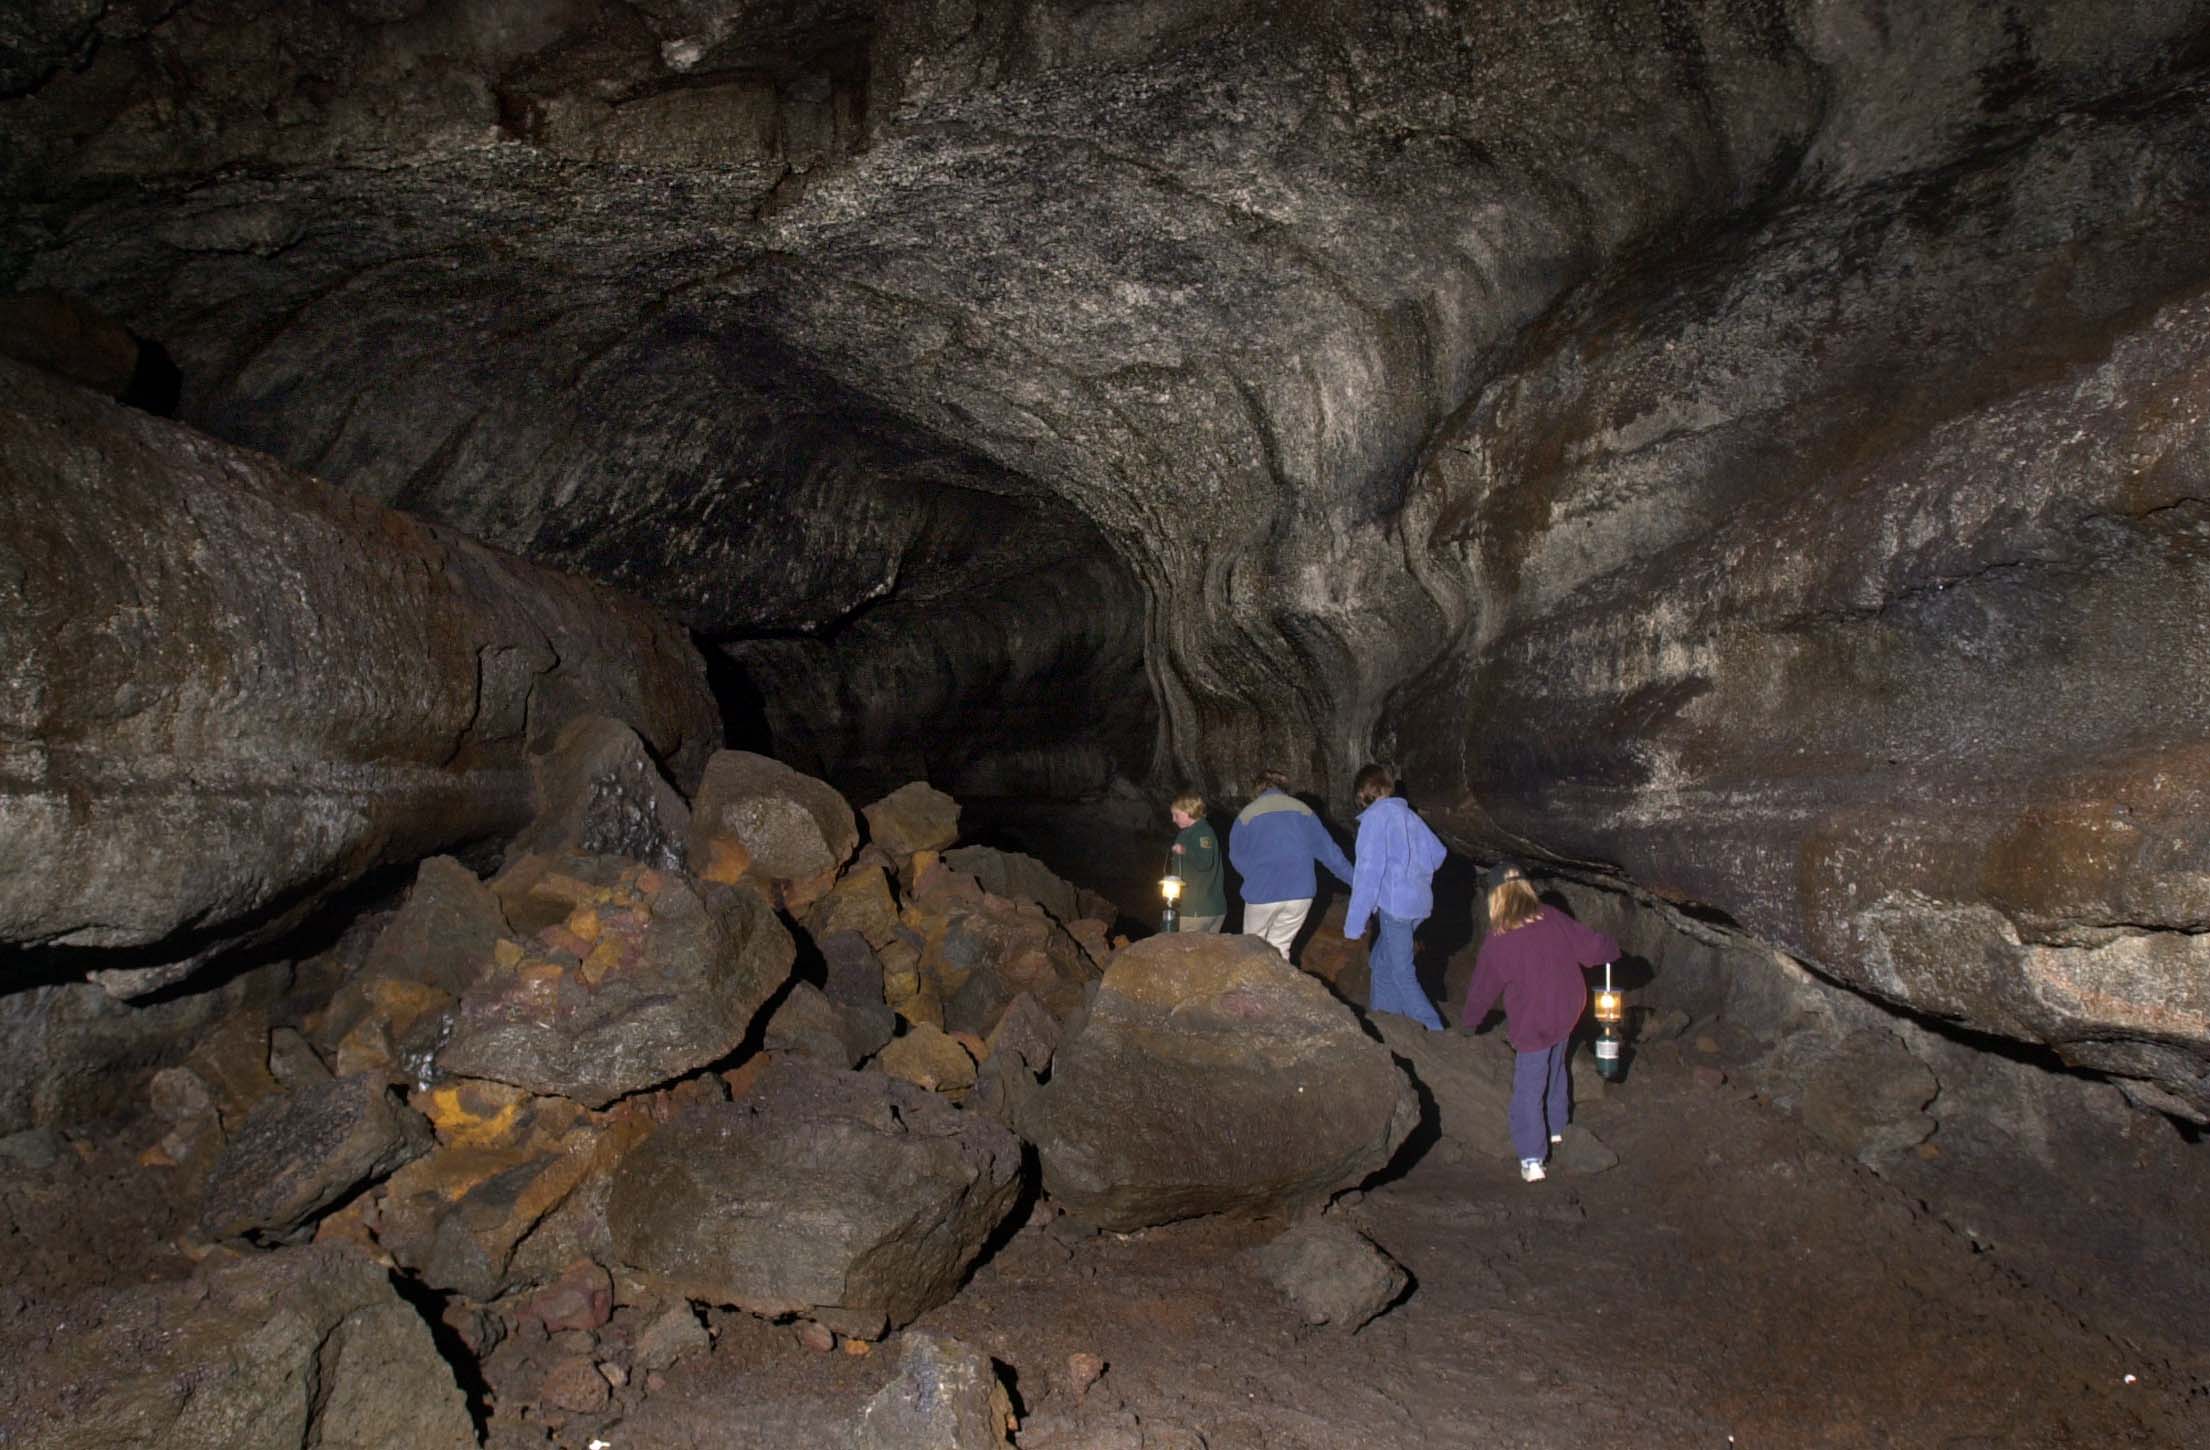 Ape Cave, at 2.5 miles, is the longest continuous lava tube in the continental United States.